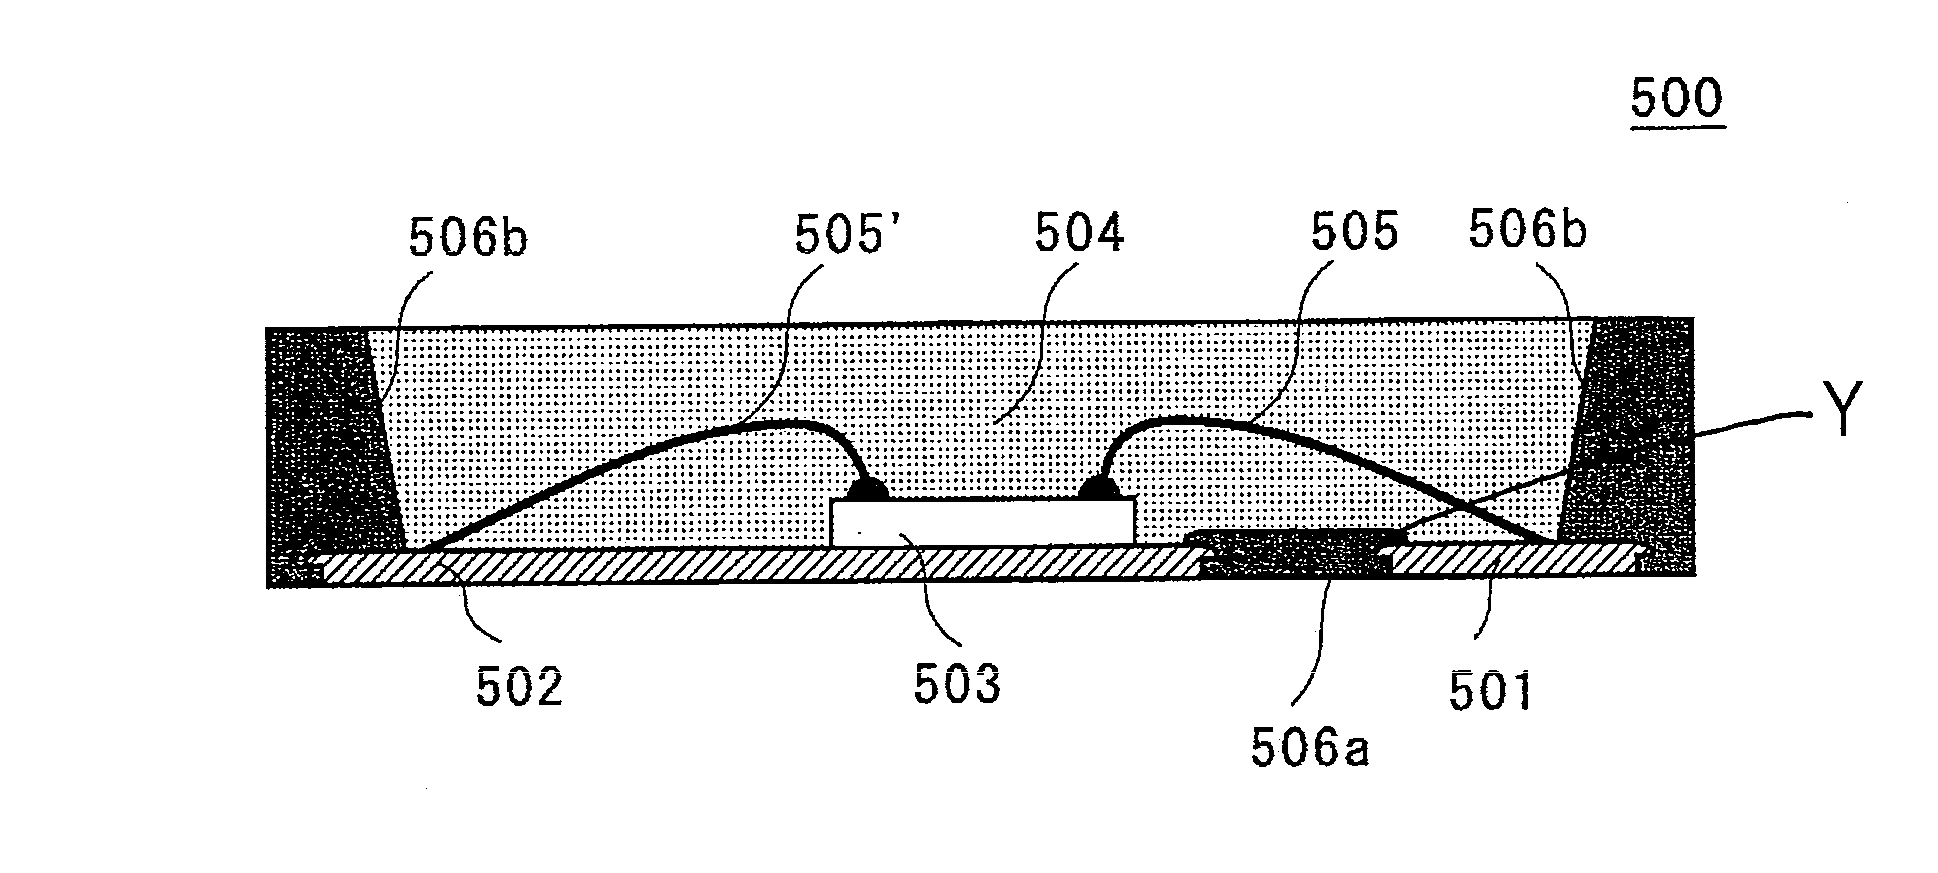 Optical-semiconductor device and method for manufactruing the same